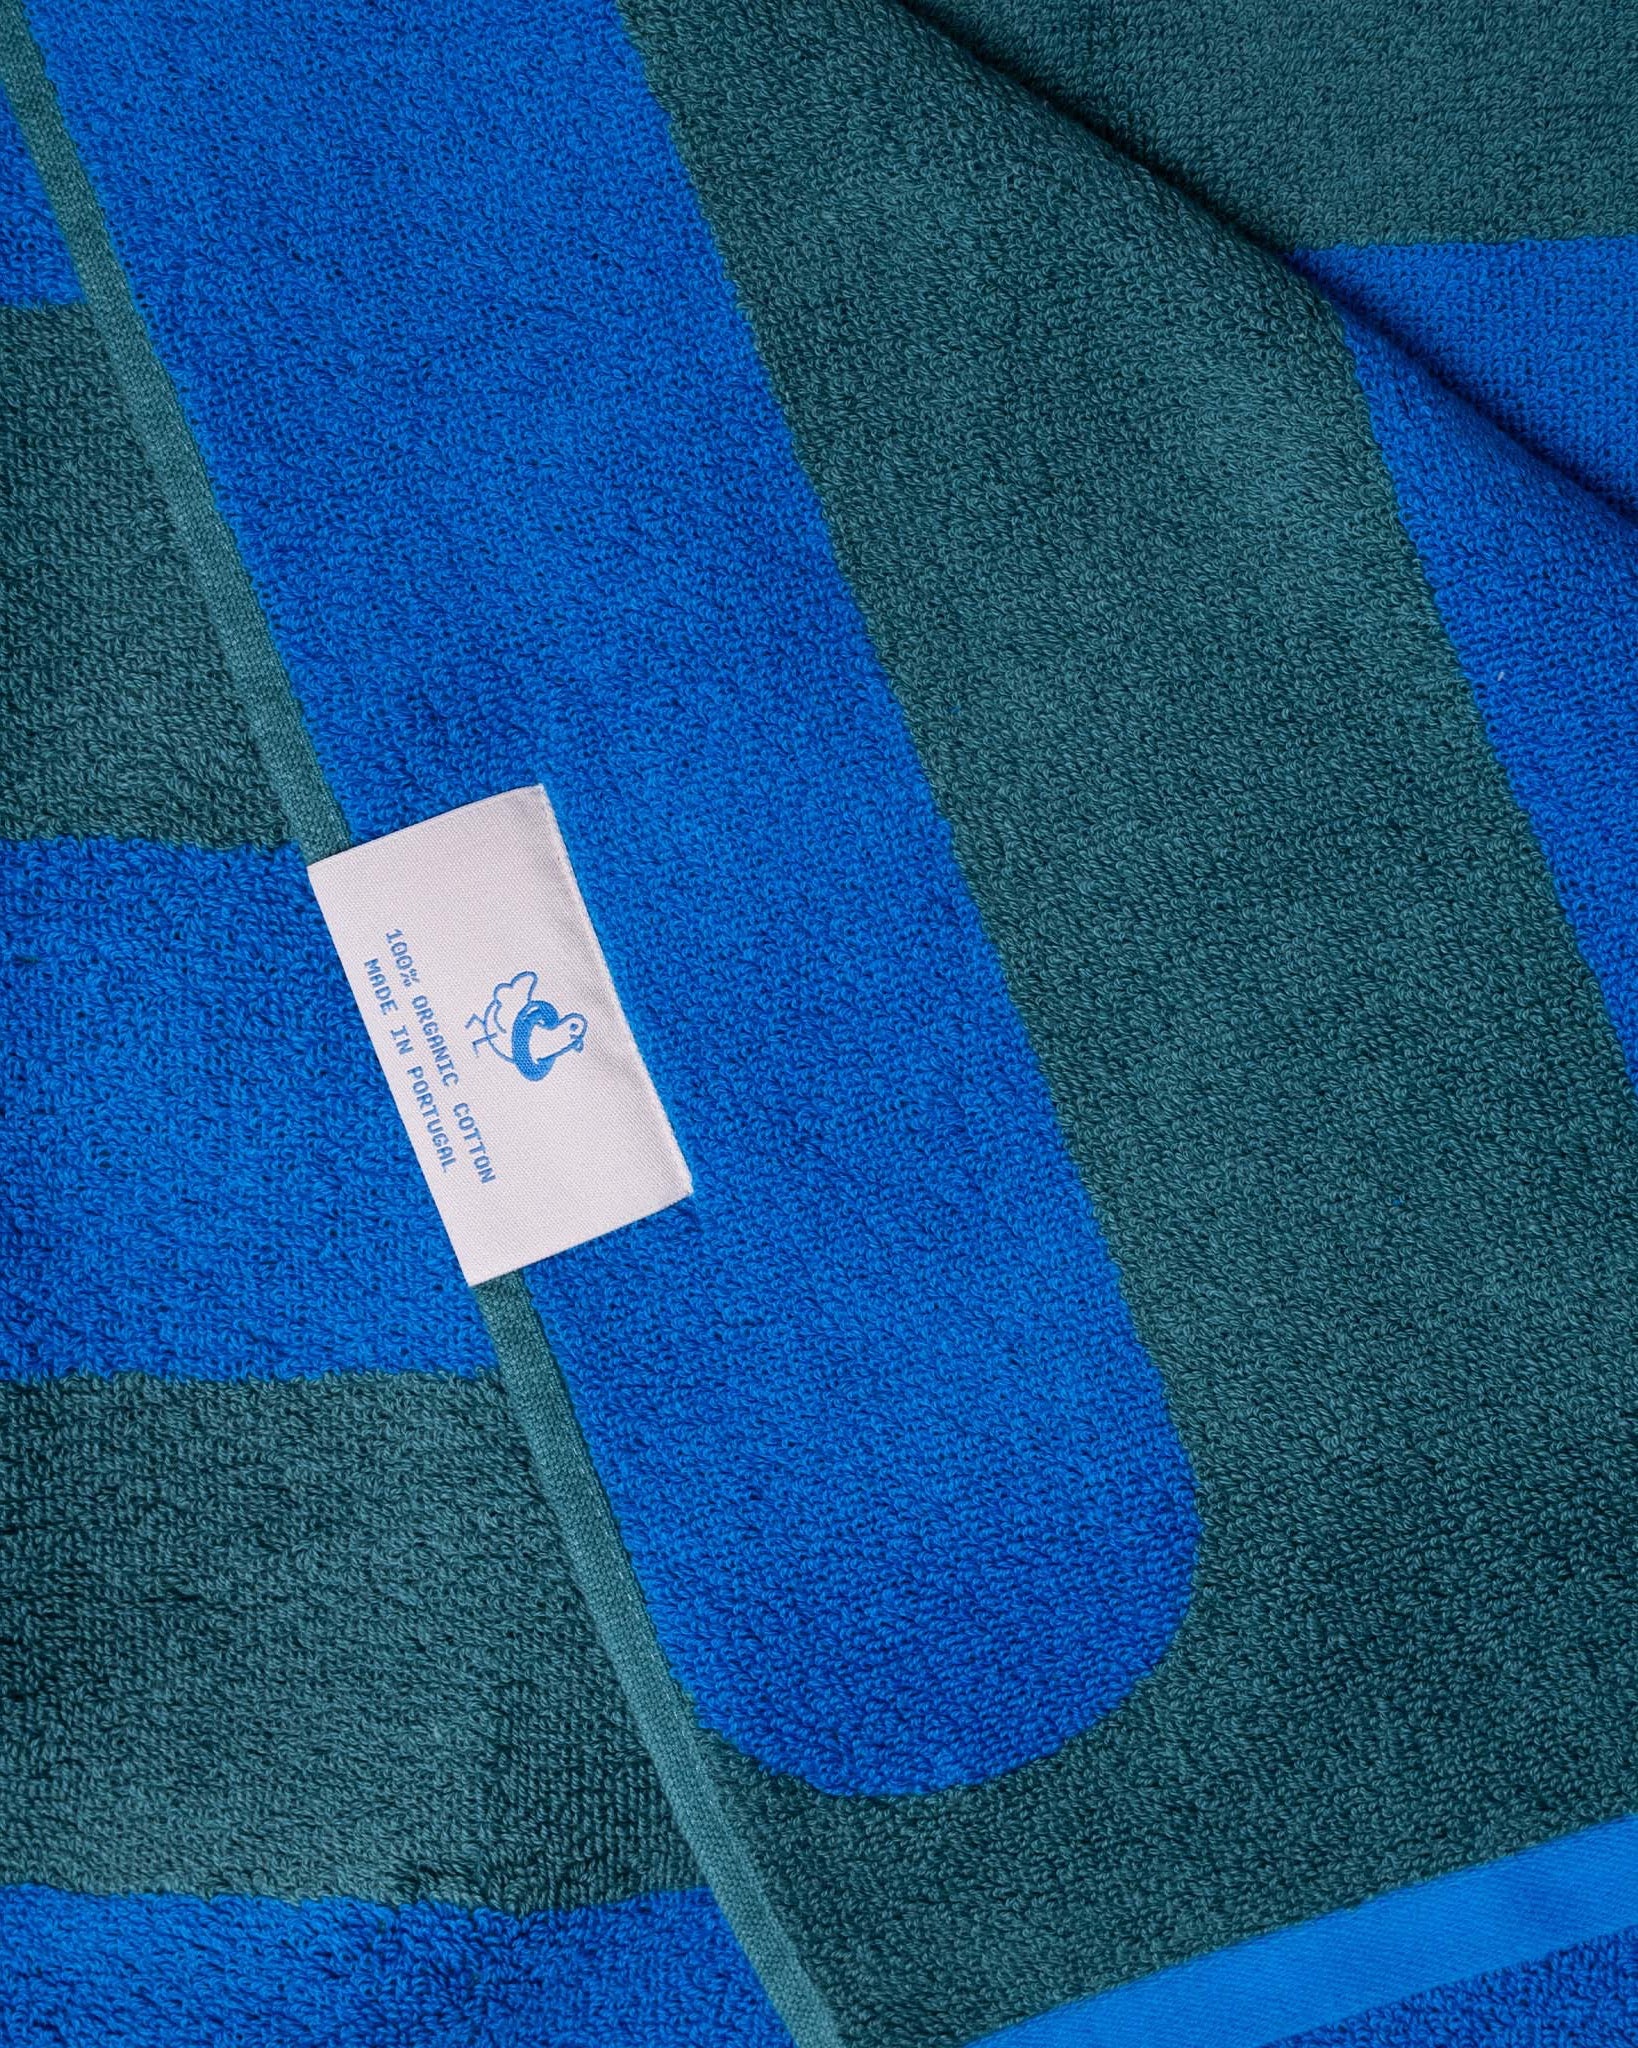 An image of a corner of a blue and green striped towel. 